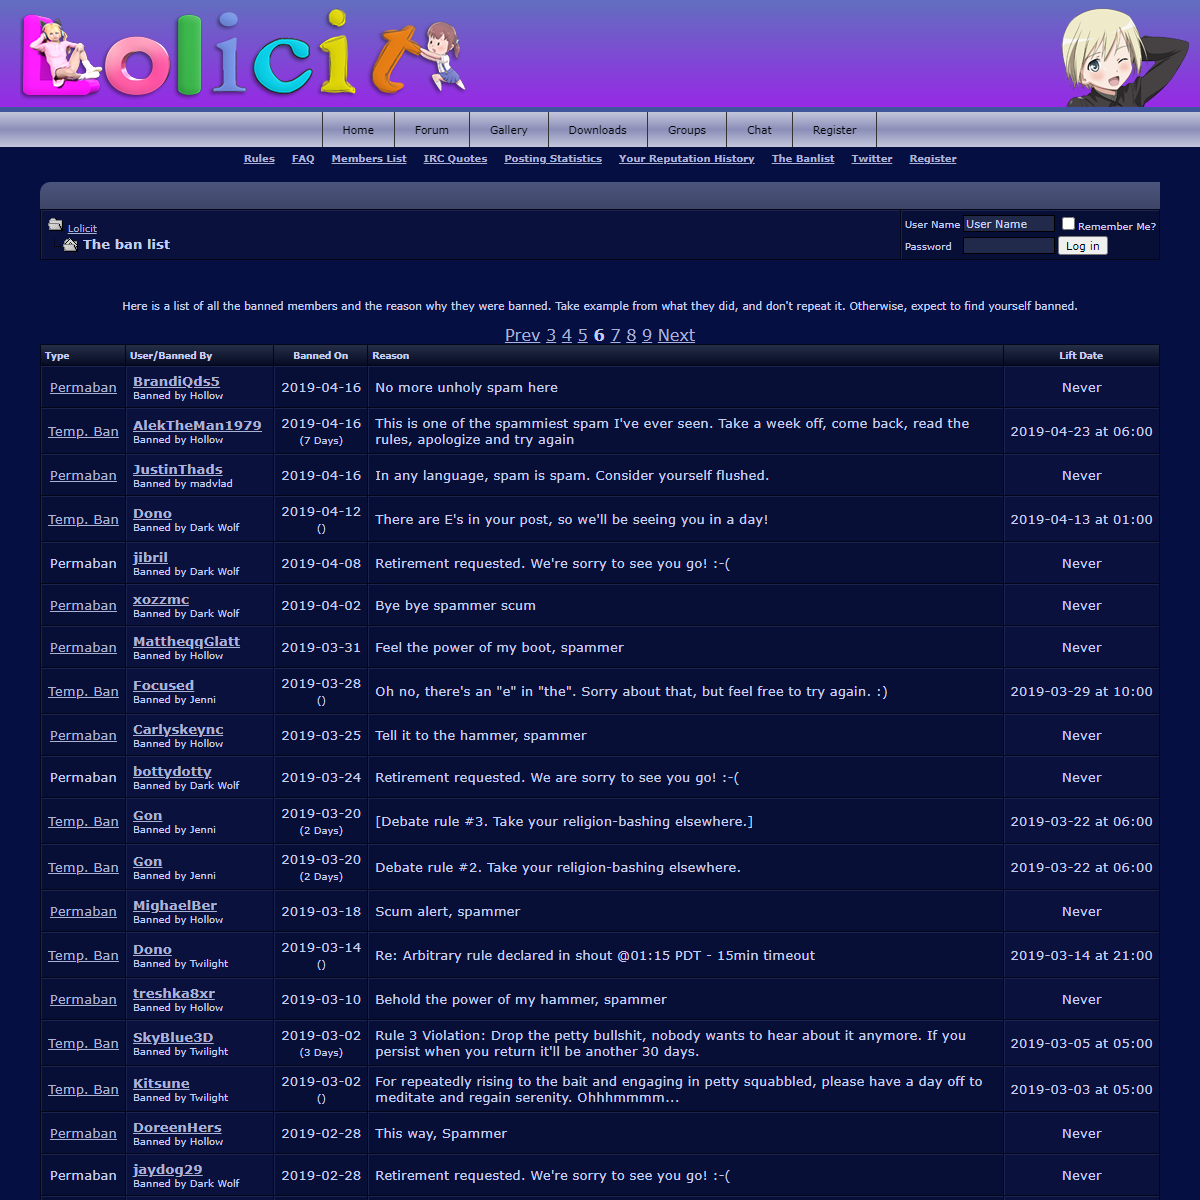 A complete backup of https://www.lolicit.org/showbans.php?page=6